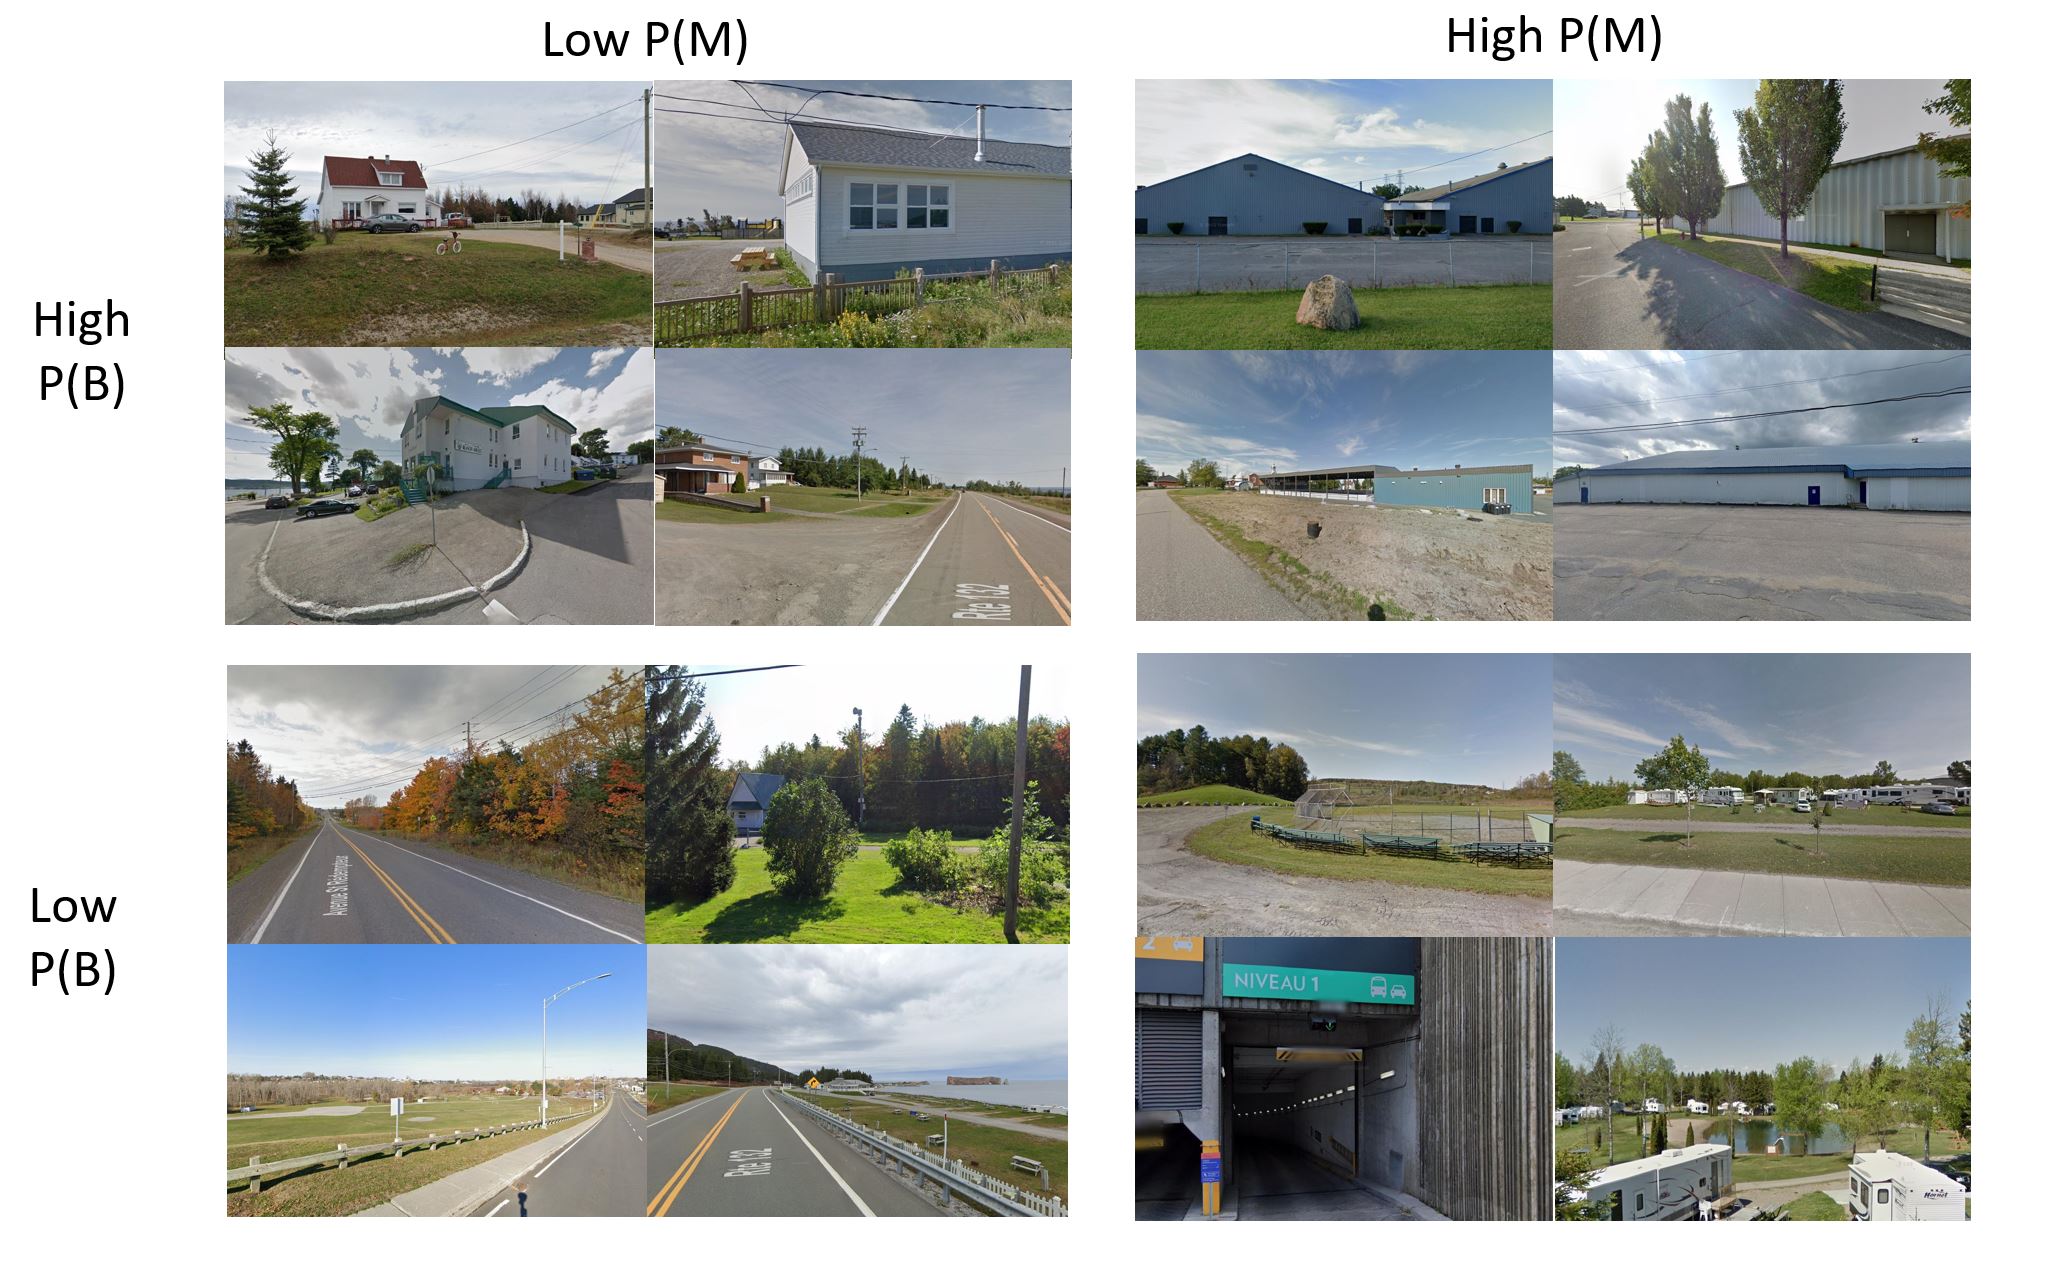 Example results of running the BLIP model on our images. Results are categorized in 4 logical classes based on the probabilities of P(B) and P(M)